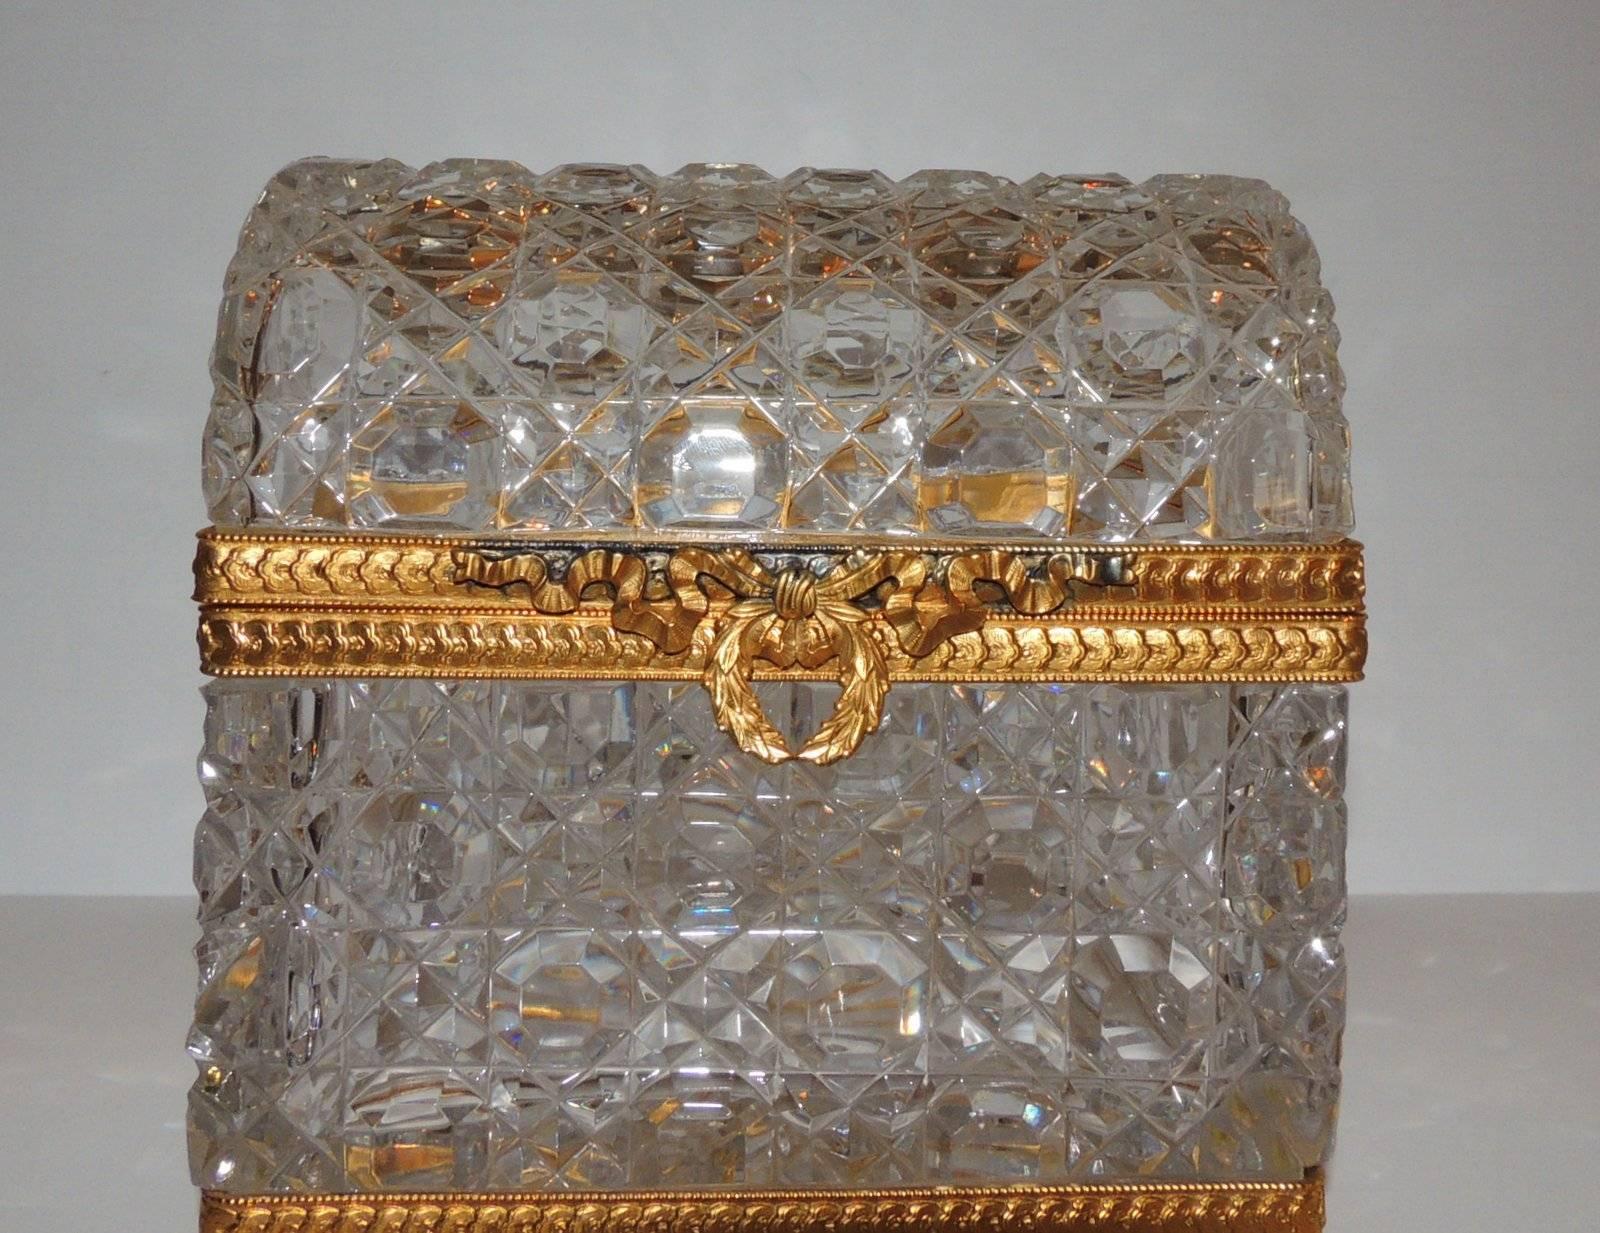 A wonderful French ormolu-mounted with wreath cut crystal beautiful multifaceted domed jewelry casket, box.

Measures: 7 H x 7 W x 4.75 D.
 